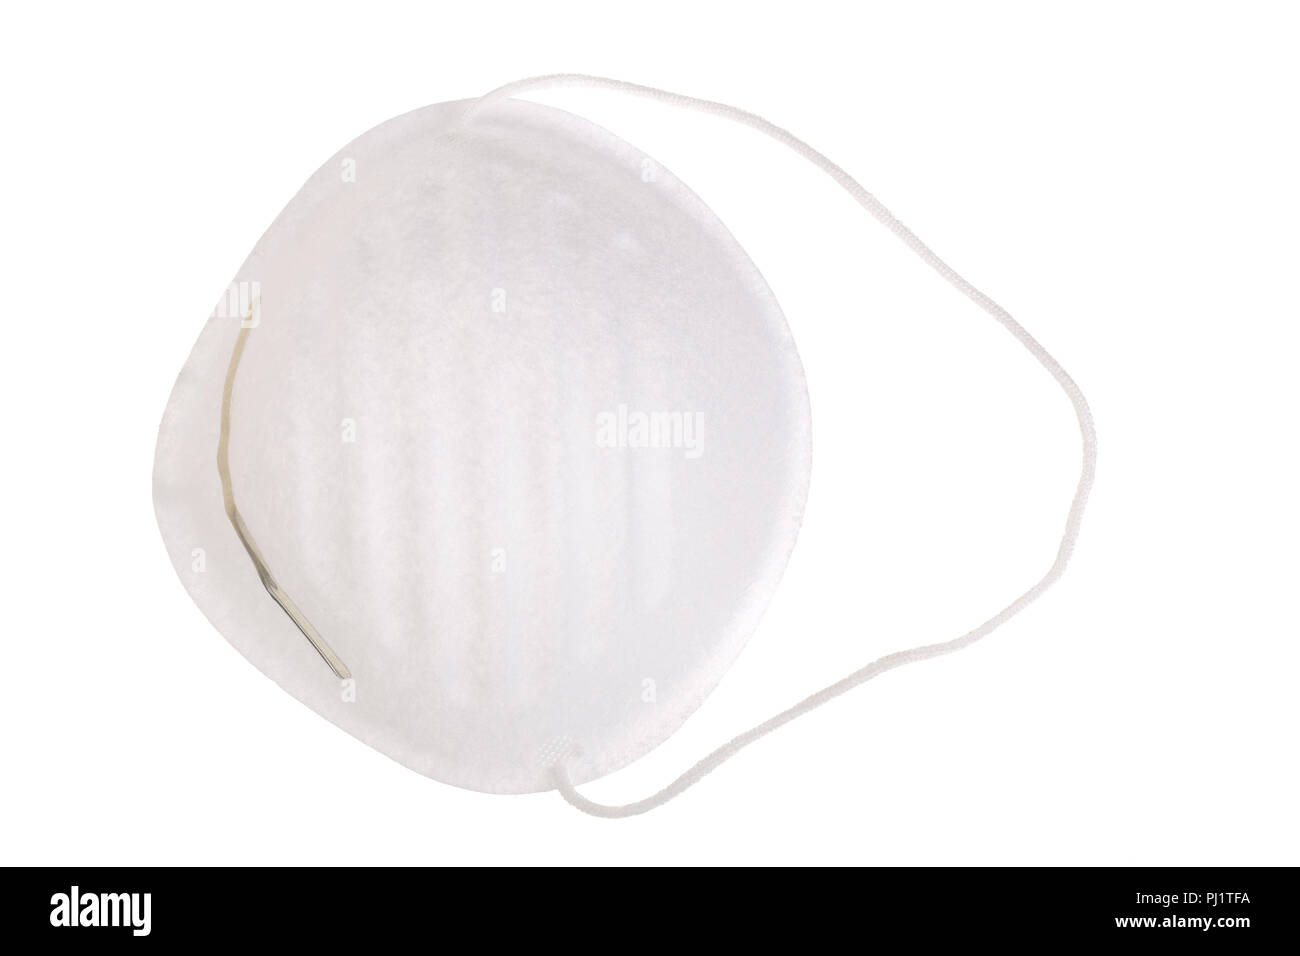 respirator for breathing protection isolated on white background. Stock Photo